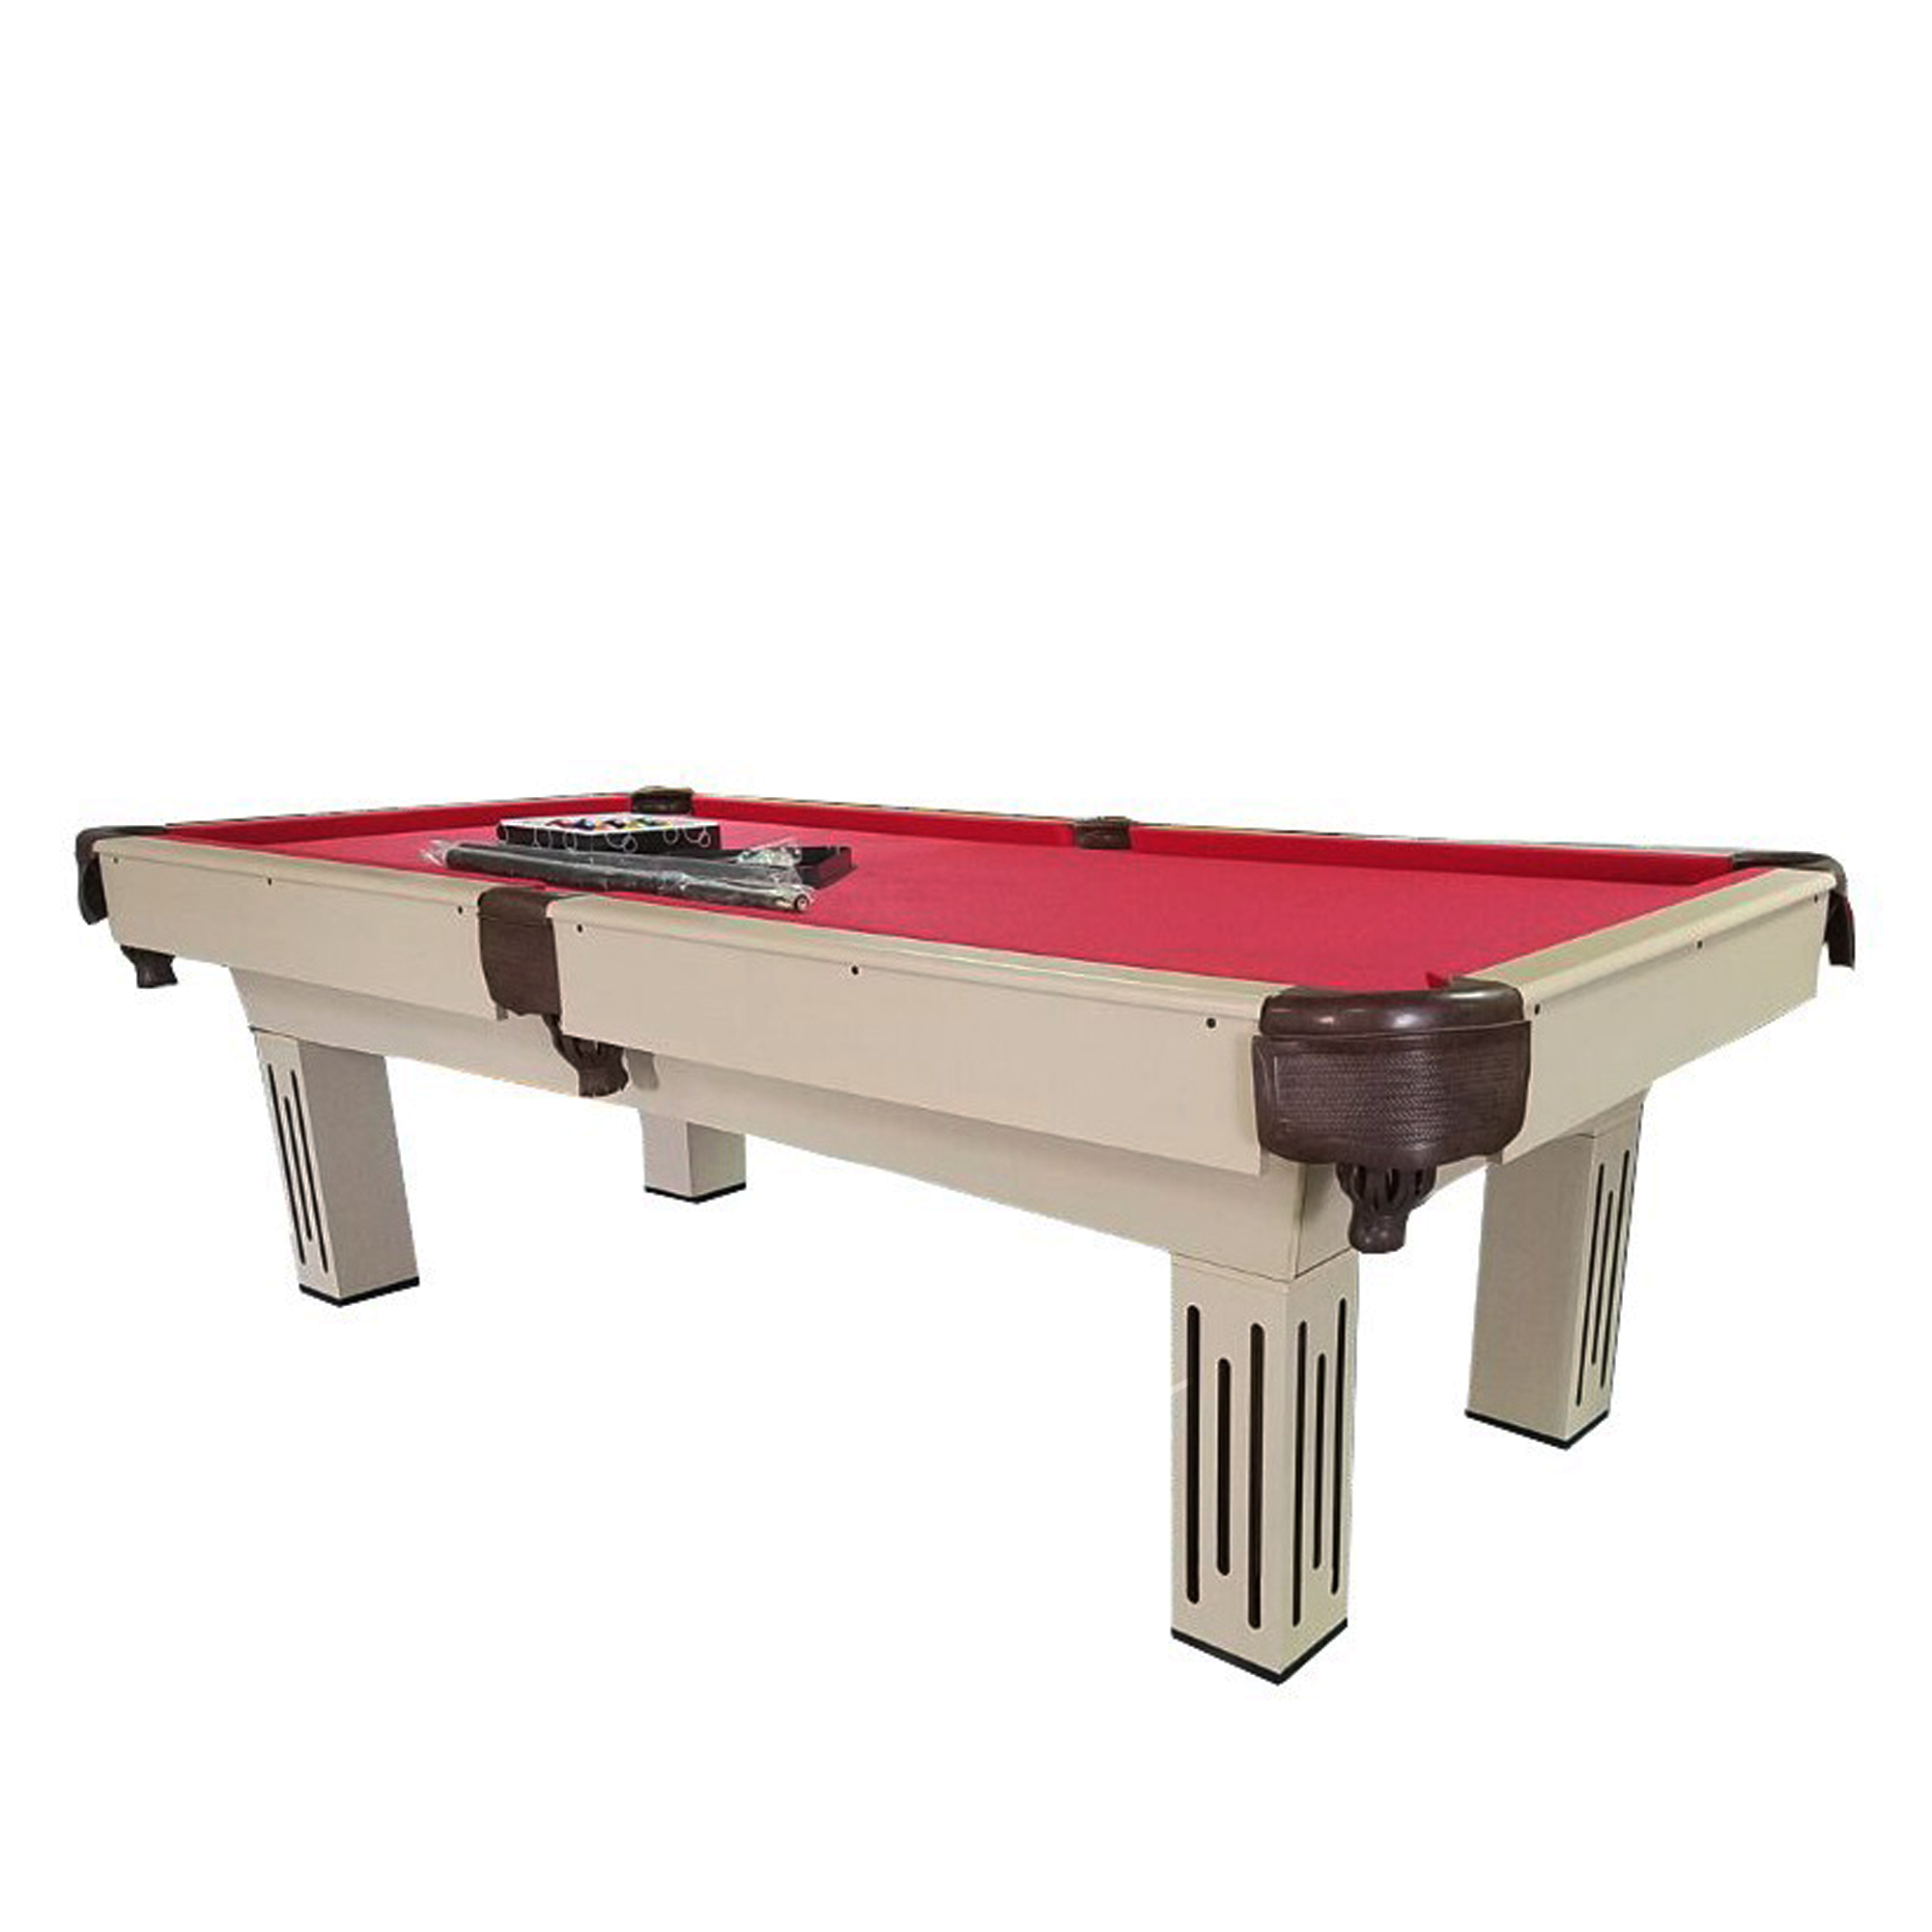 Pool Central 8' x 4' Red Billiard and Pool Net Pocket Game Table